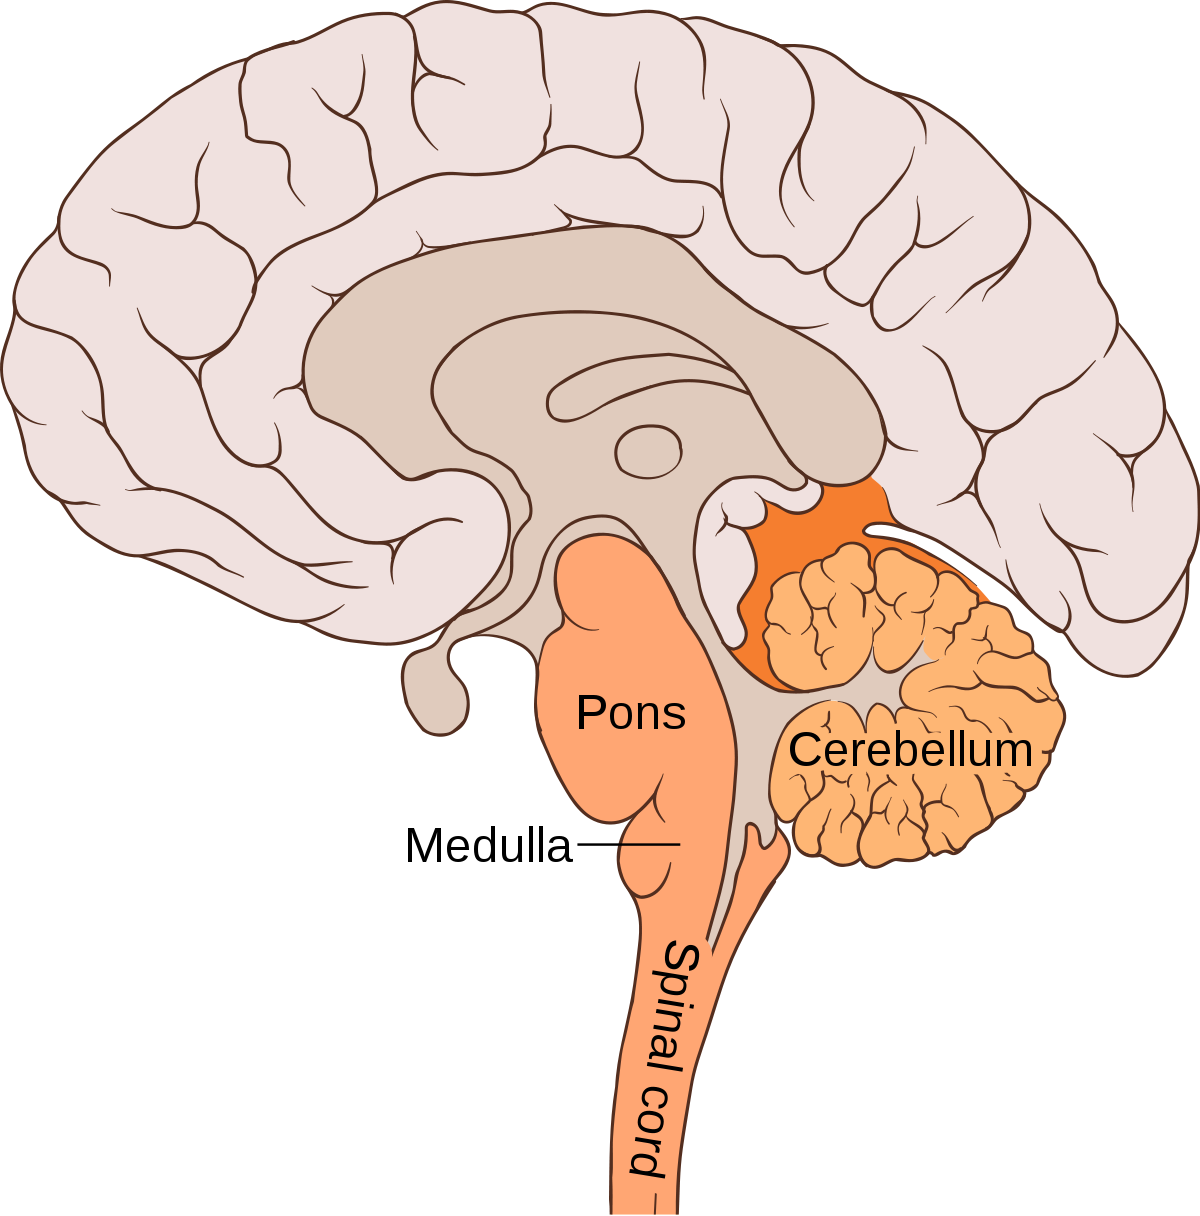 <p>the first large swelling at the top of the spinal cord, forming the lowest part of the brain, which is responsible for life-sustaining functions such as breathing, swallowing, and heart rate. </p>